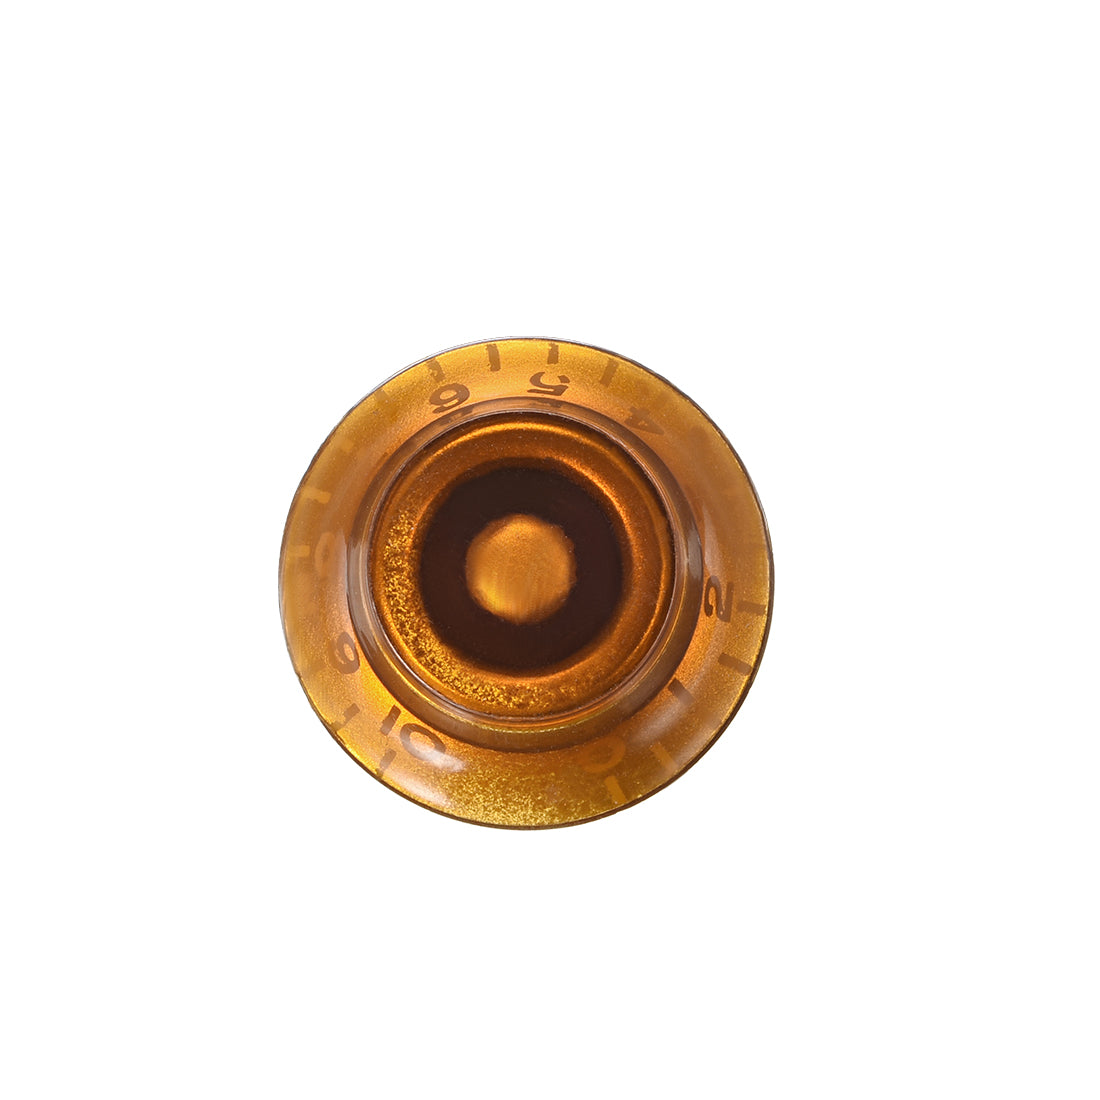 Uxcell Uxcell 2pcs 6mm Potentiometer Control Knobs For LP Electric Guitar Acrylic Volume Tone Knobs Amber Tone